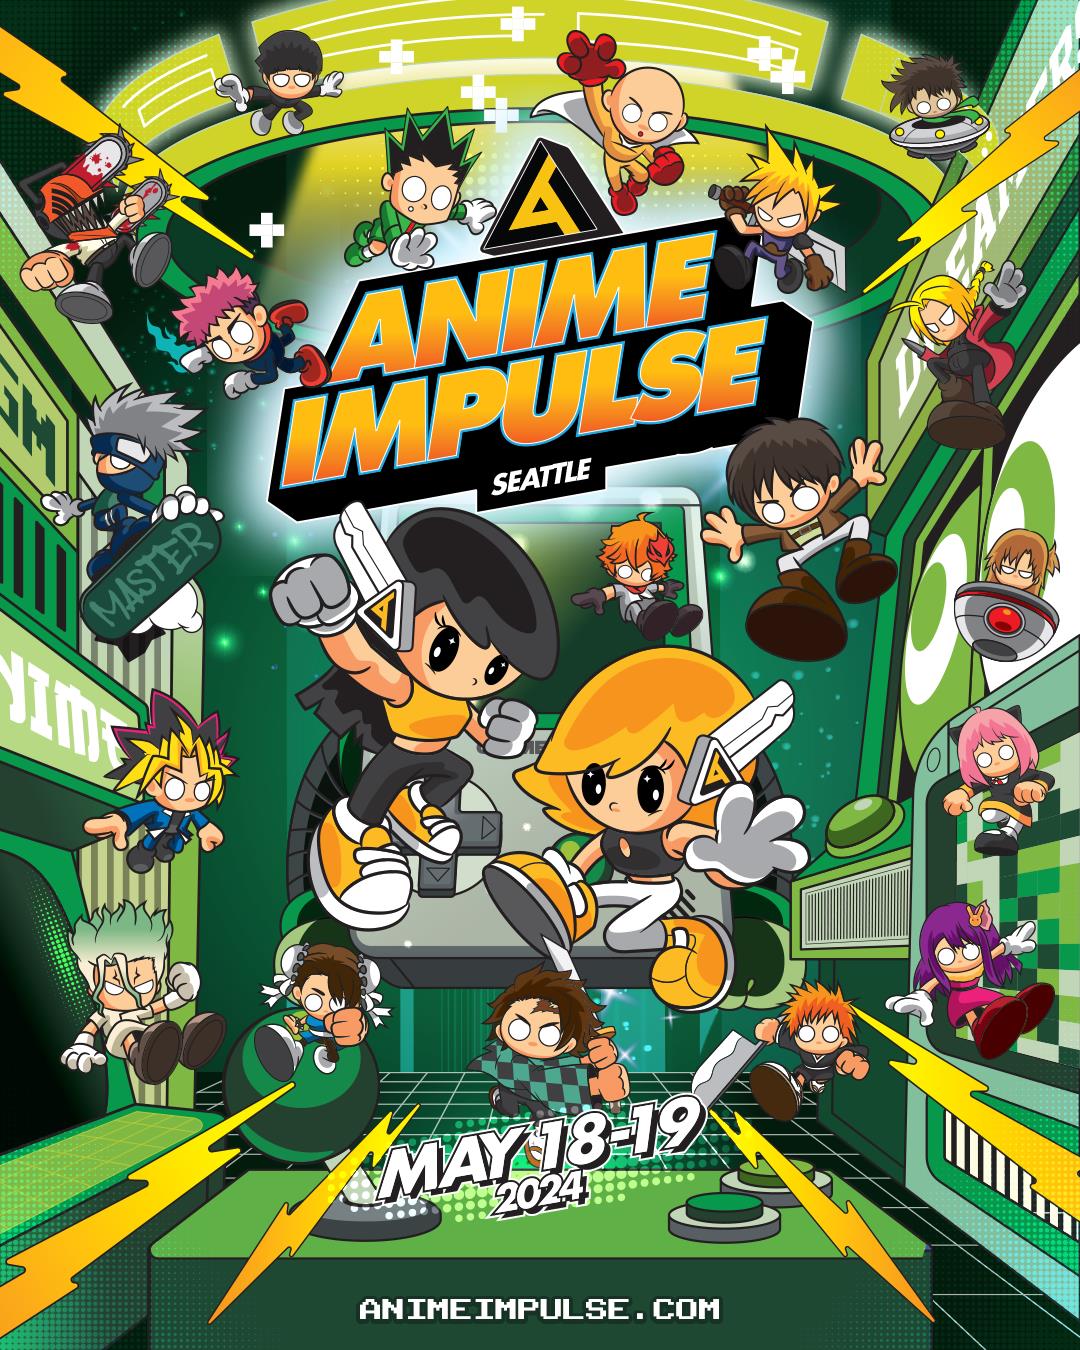 Buy Tickets to ANIME Impulse Seattle 2024 in Seattle on May 18, 2024